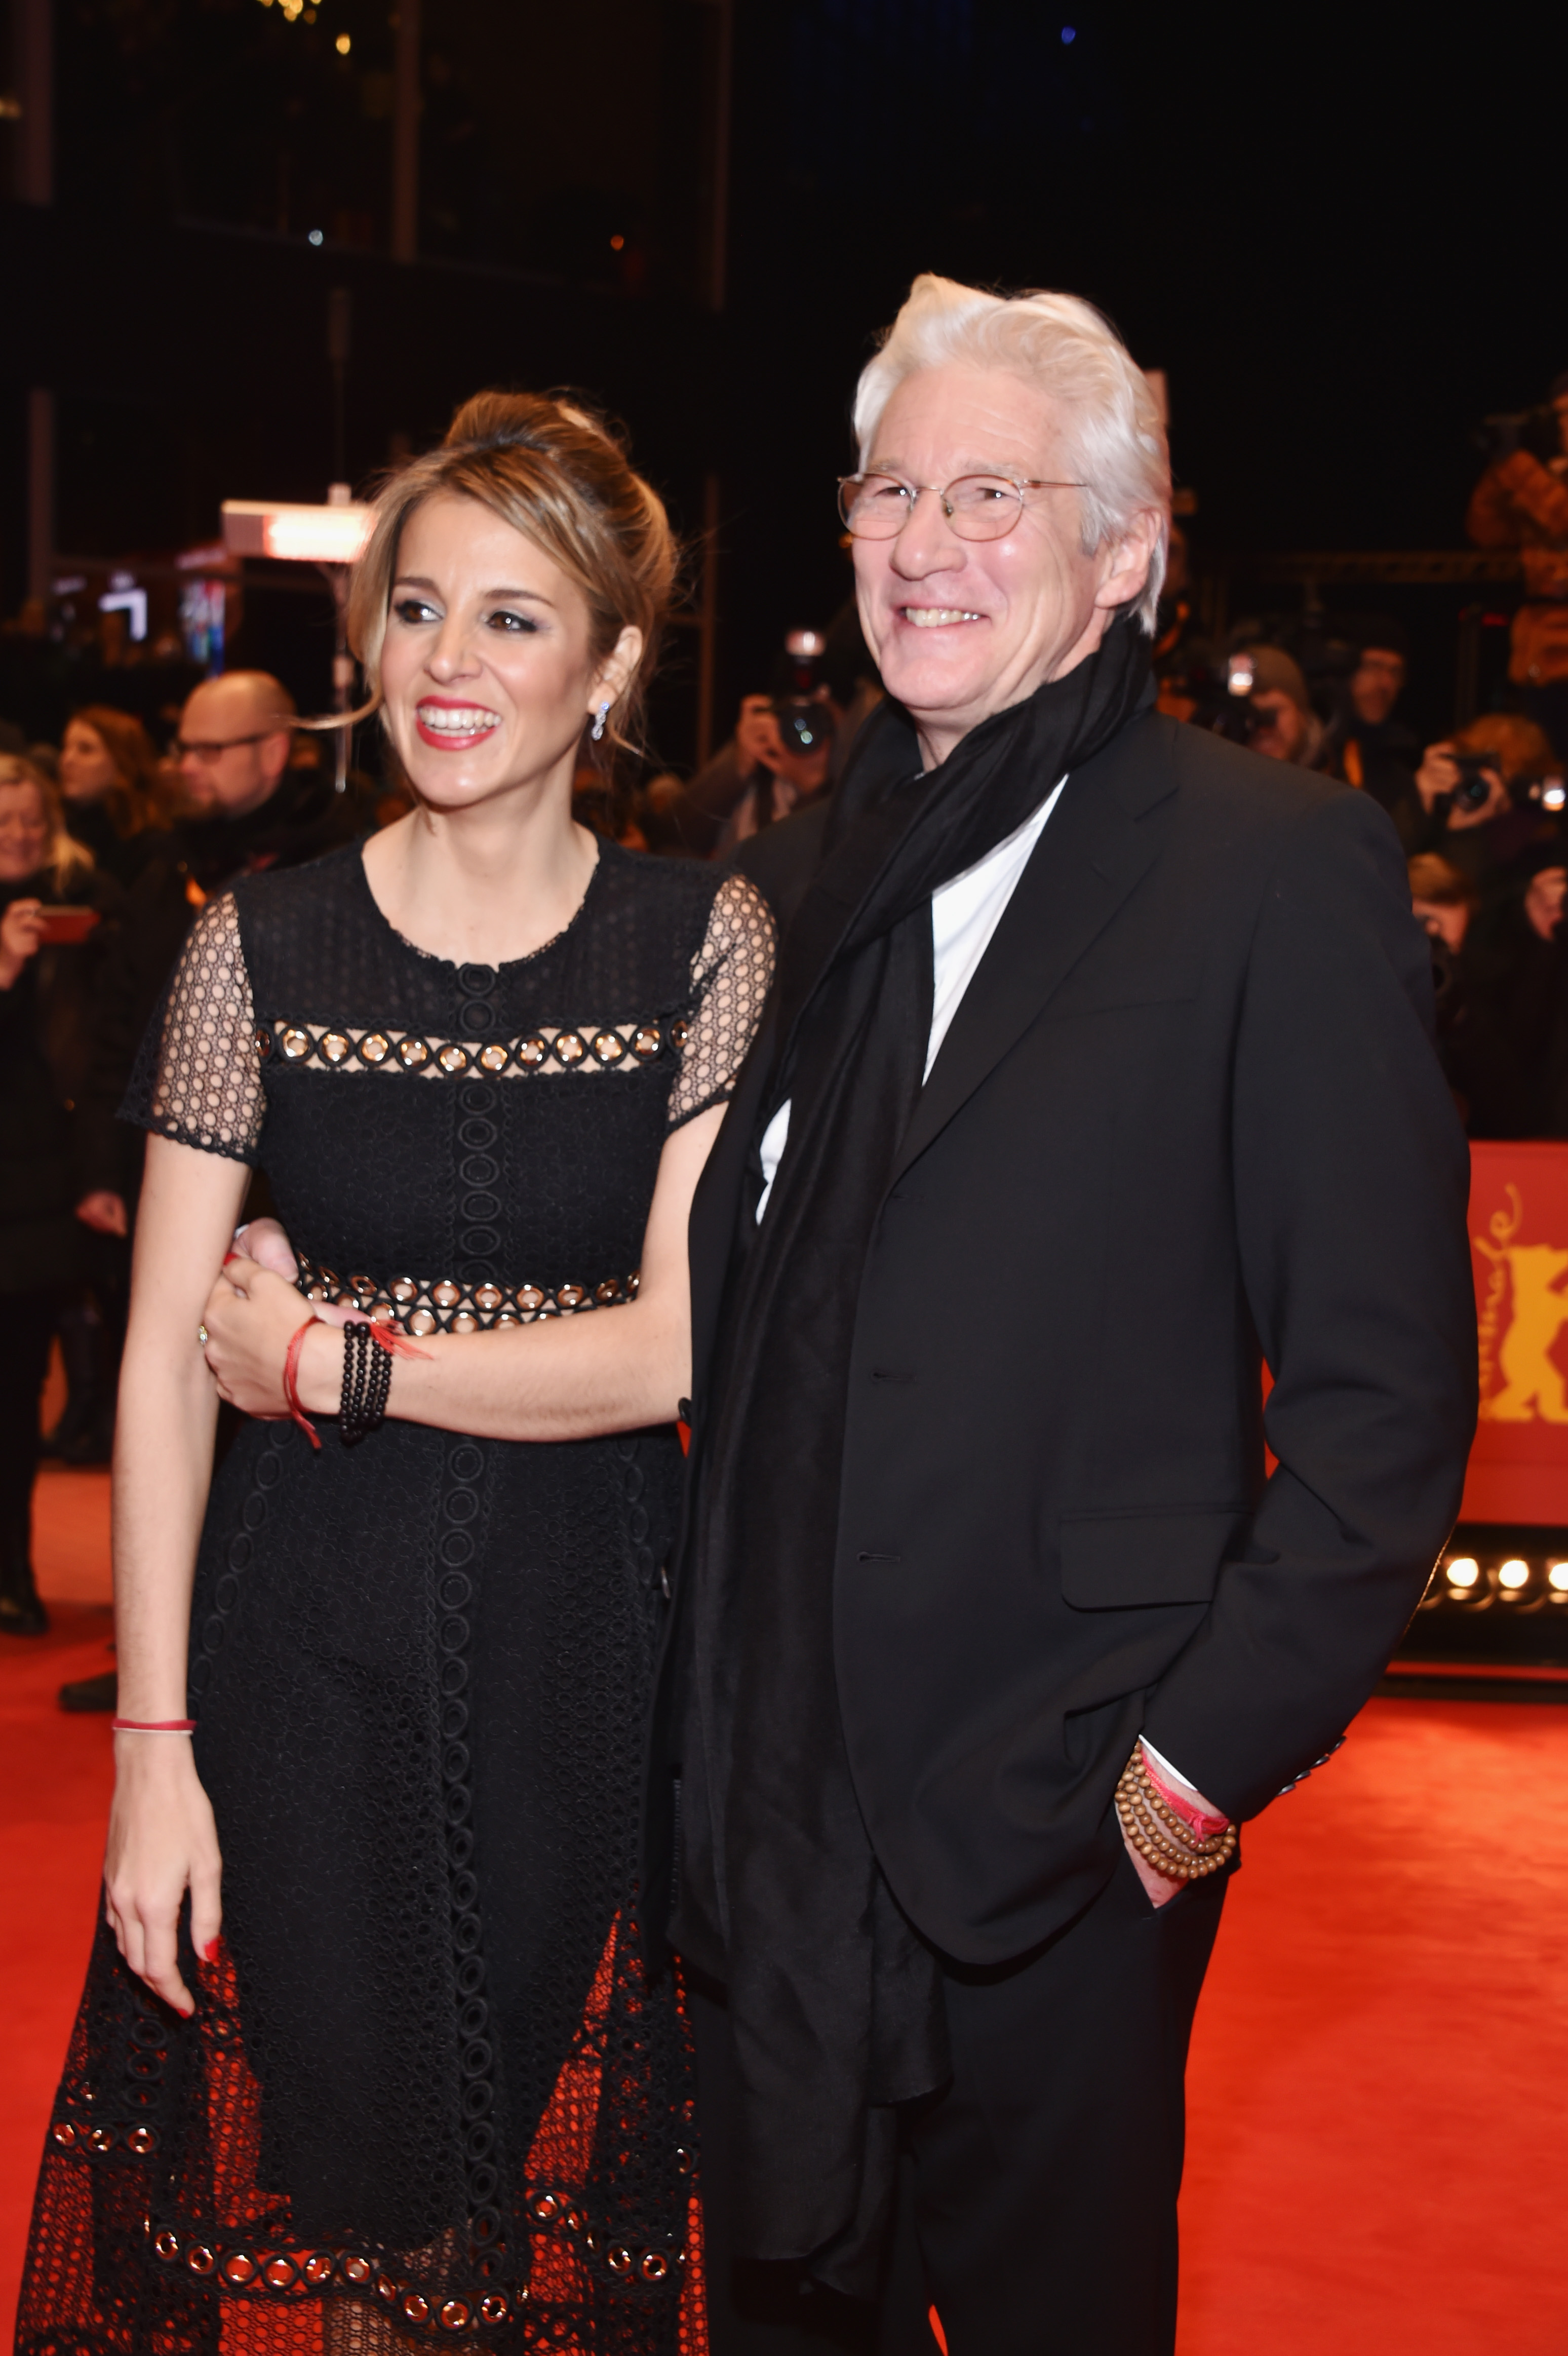 BERLIN, GERMANY - FEBRUARY 10: Actor Richard Gere and girlfriend Alejandra Silva attend the 'The Dinner' premiere during the 67th Berlinale International Film Festival Berlin at Berlinale Palace on February 10, 2017 in Berlin, Germany. (Photo by Pascal Le Segretain/Getty Images)